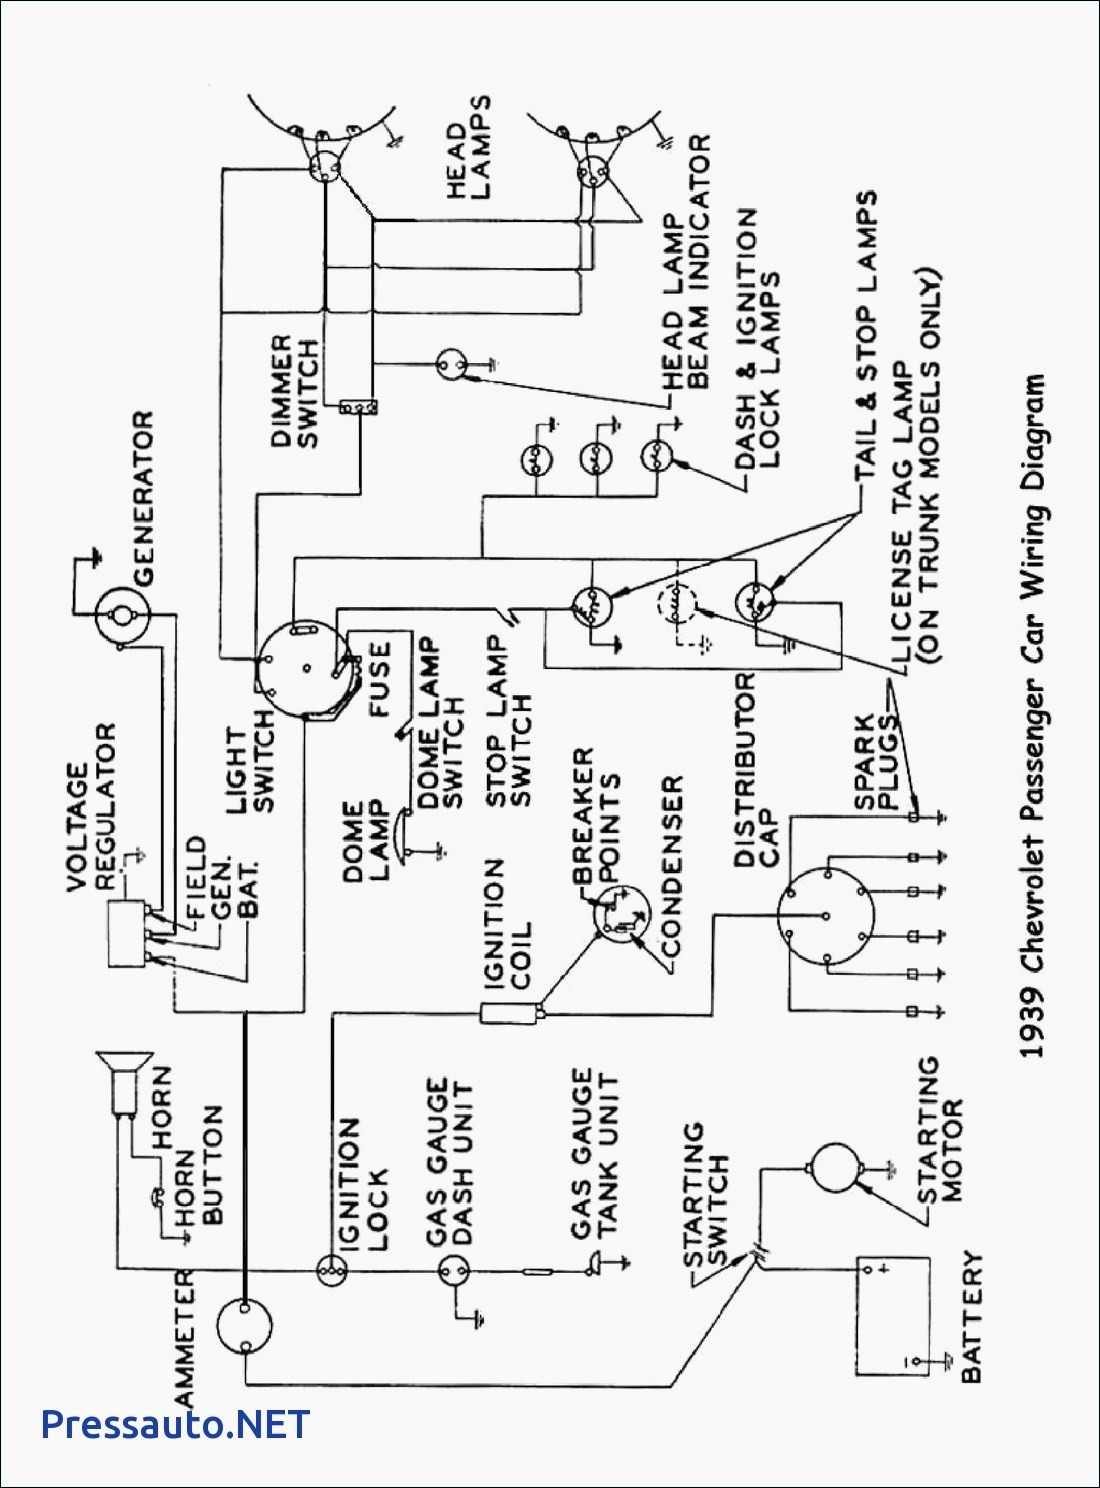 John Deere 318 Ignition Switch Wiring Diagram from mainetreasurechest.com